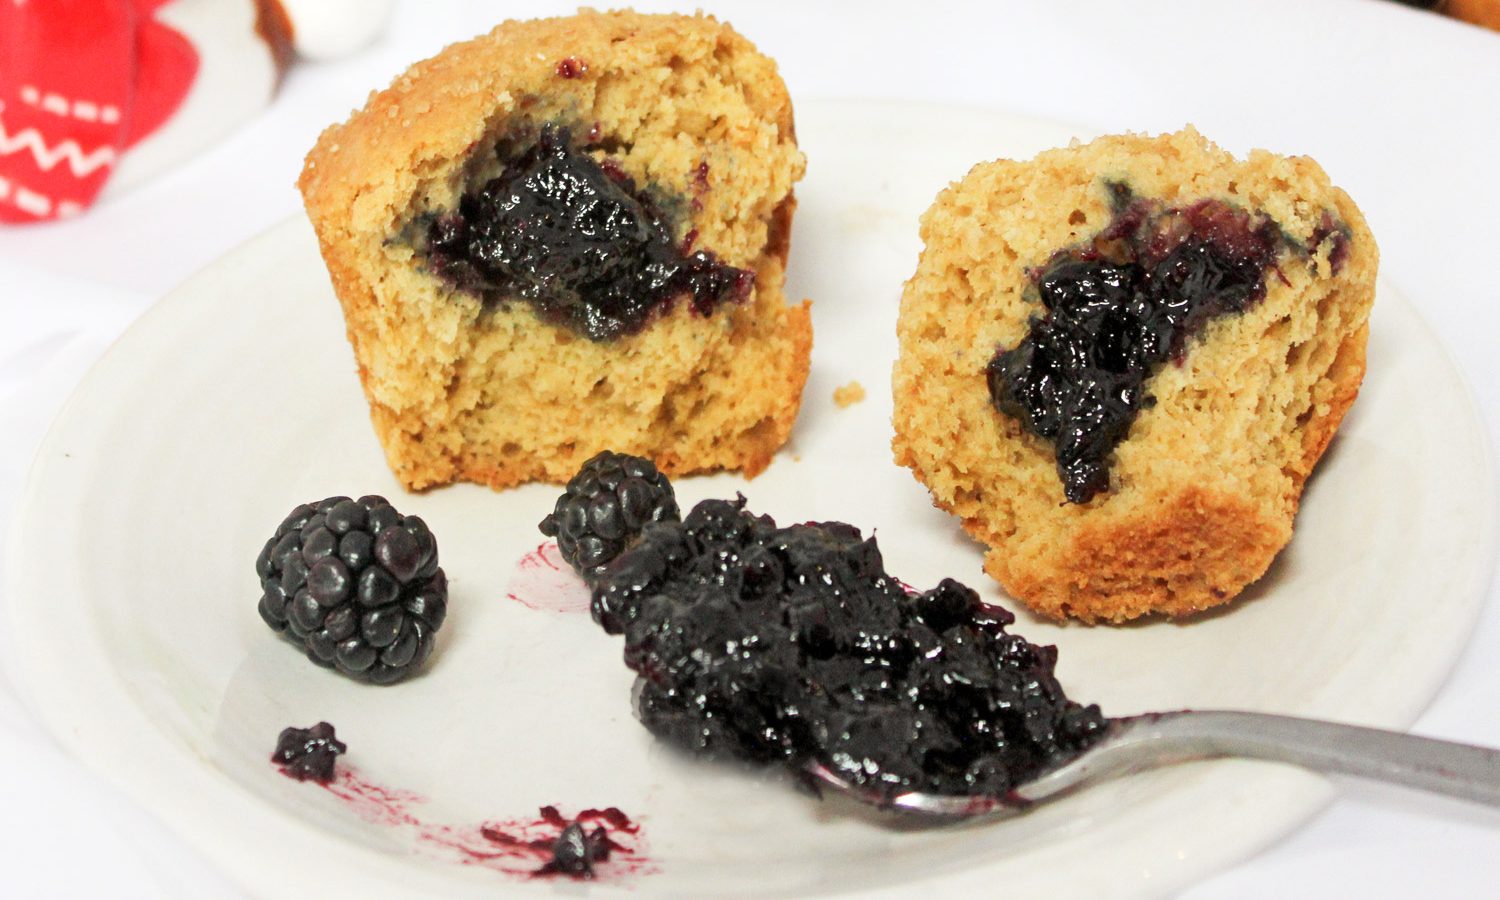 Blackberry jam on spoons with blackberry jam filled muffins